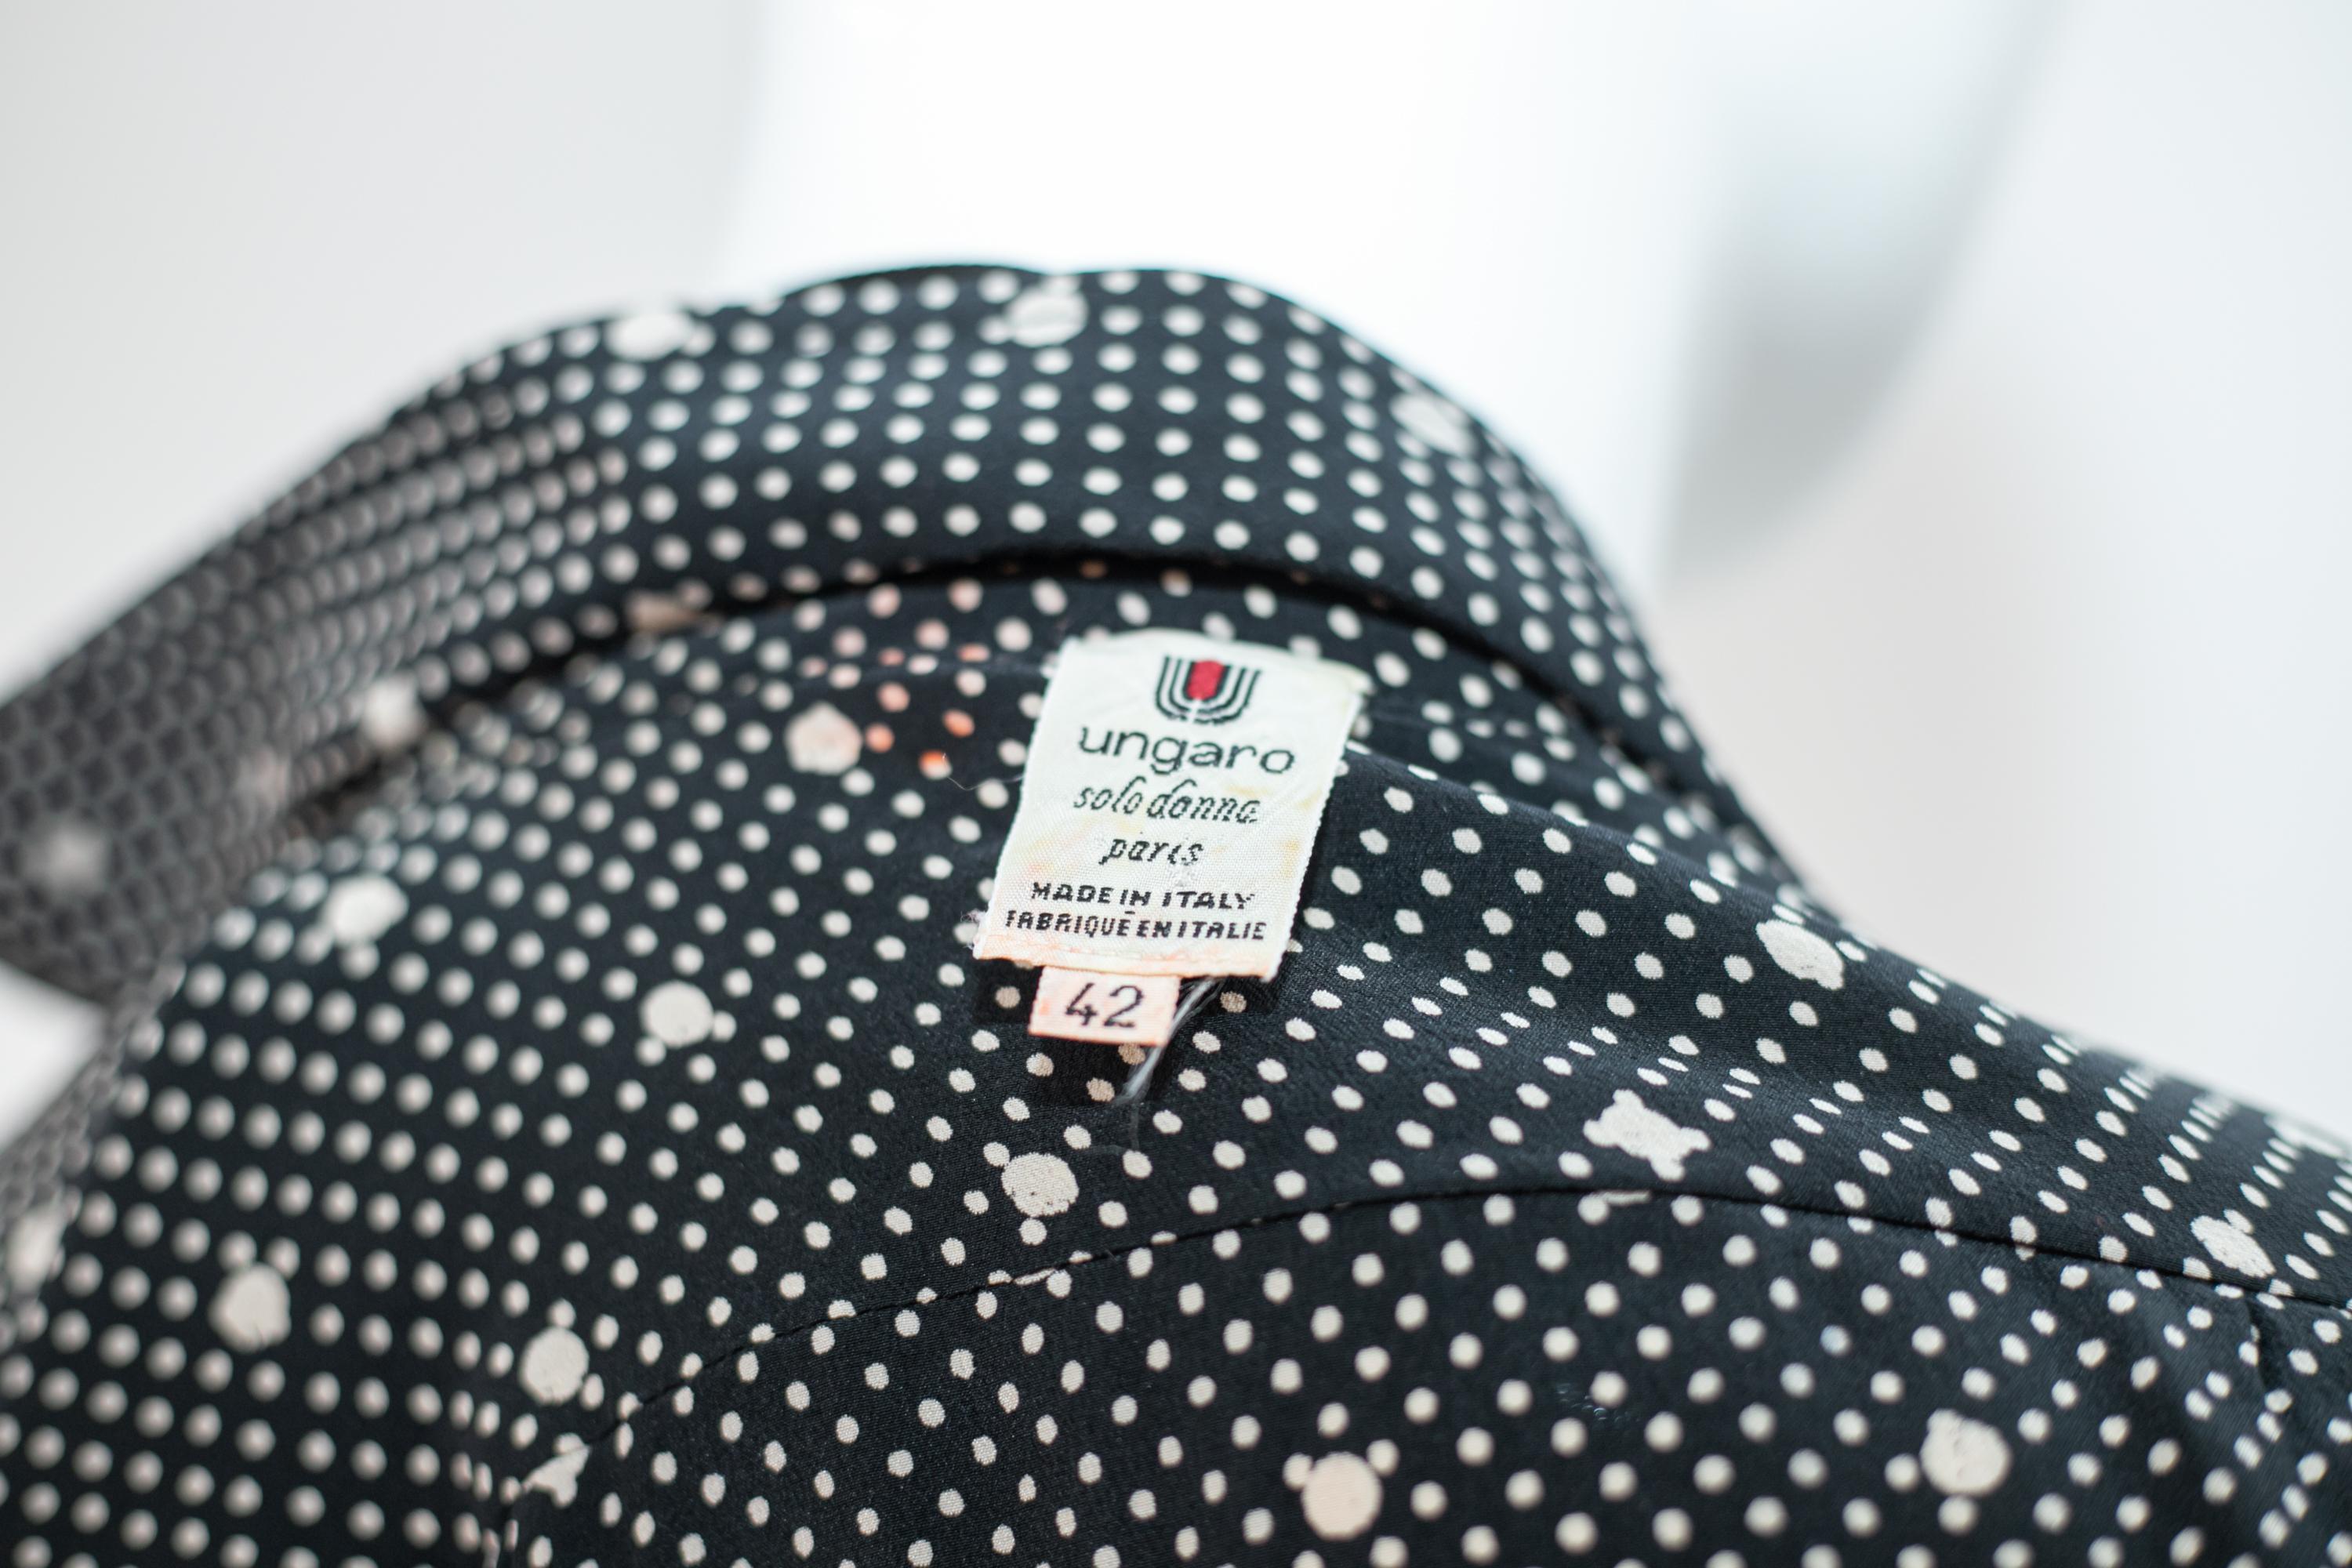 Charming polka dot blouse designed by Emanuel Ungaro in the 1990s, made in Italy.
The shirt has two main colors, black and white. It has long, soft sleeves with narrower cuffs, which create a very charming and sweet effect. The collar is high and